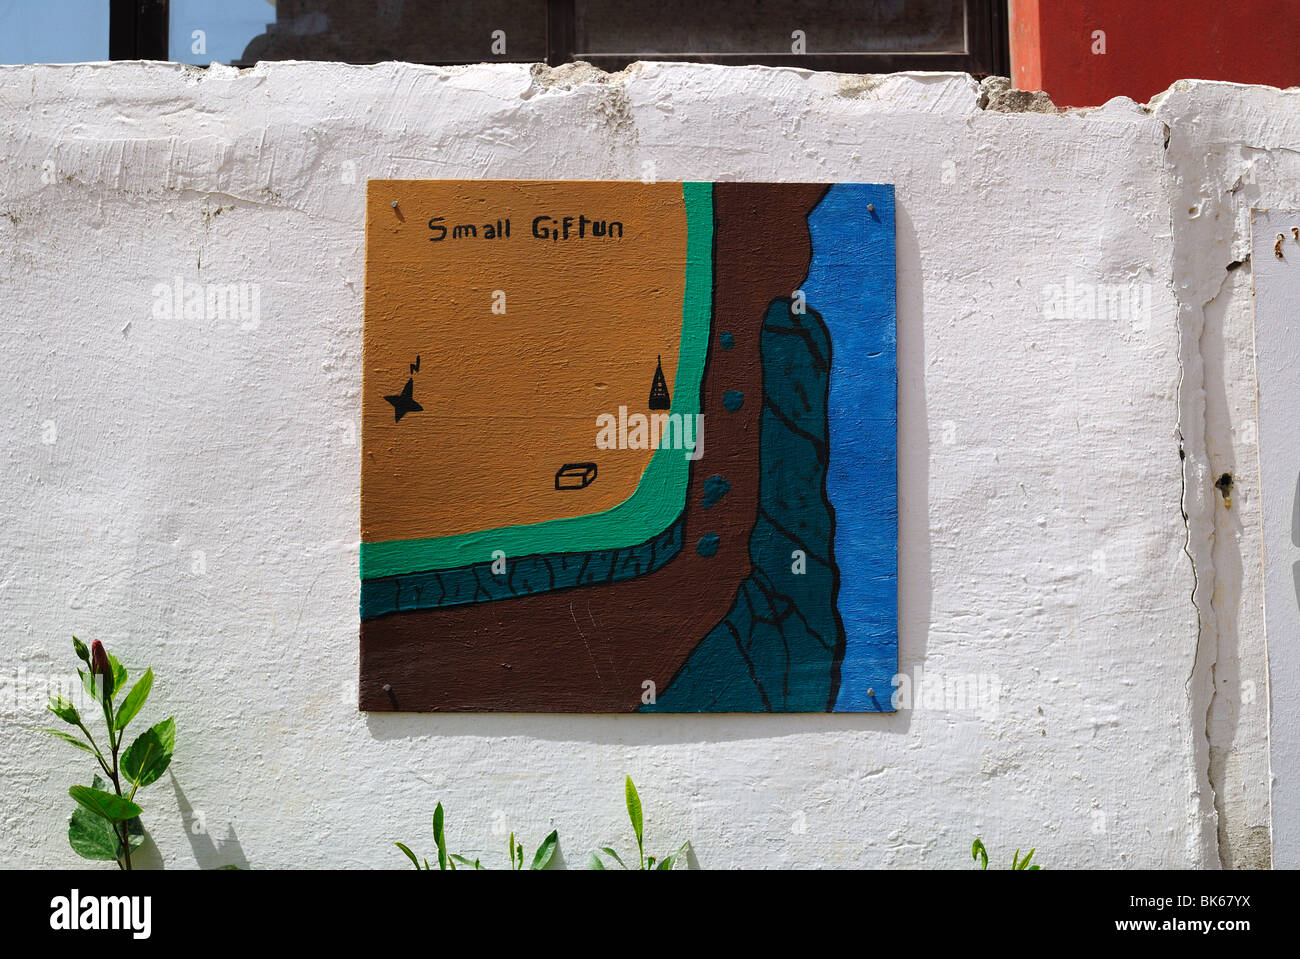 Painting of the map of Small Giftun Island on a street wall in Hurghada, Egypt Stock Photo